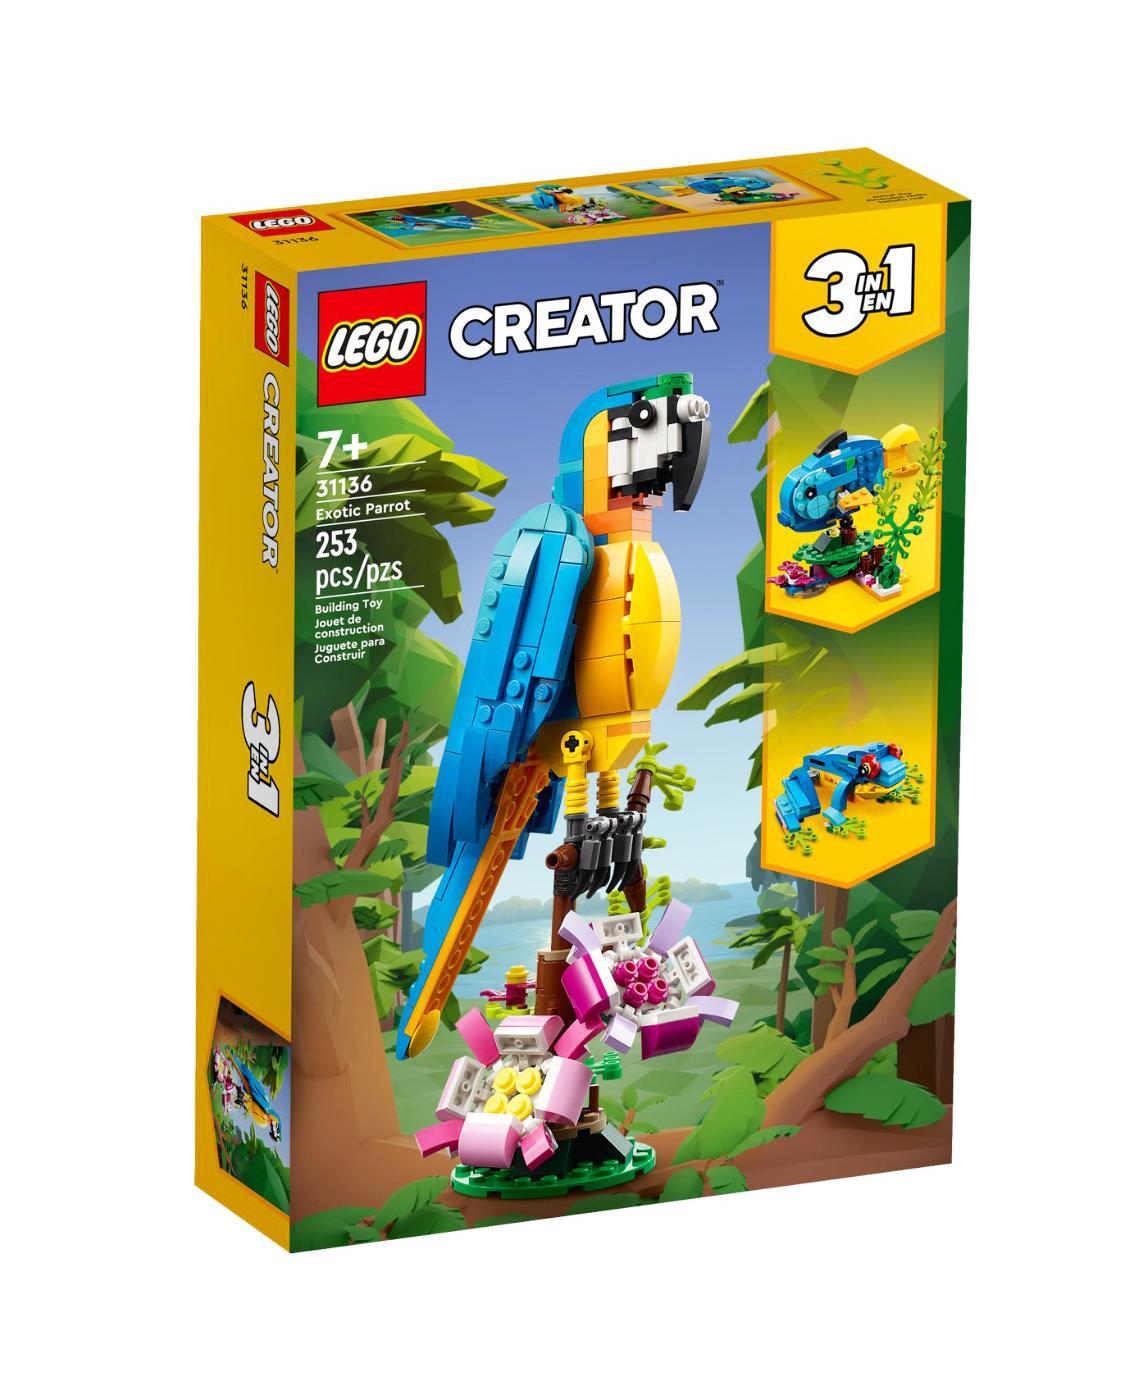 LEGO Creator 3-in-1 Exotic Parrot Set; image 1 of 2